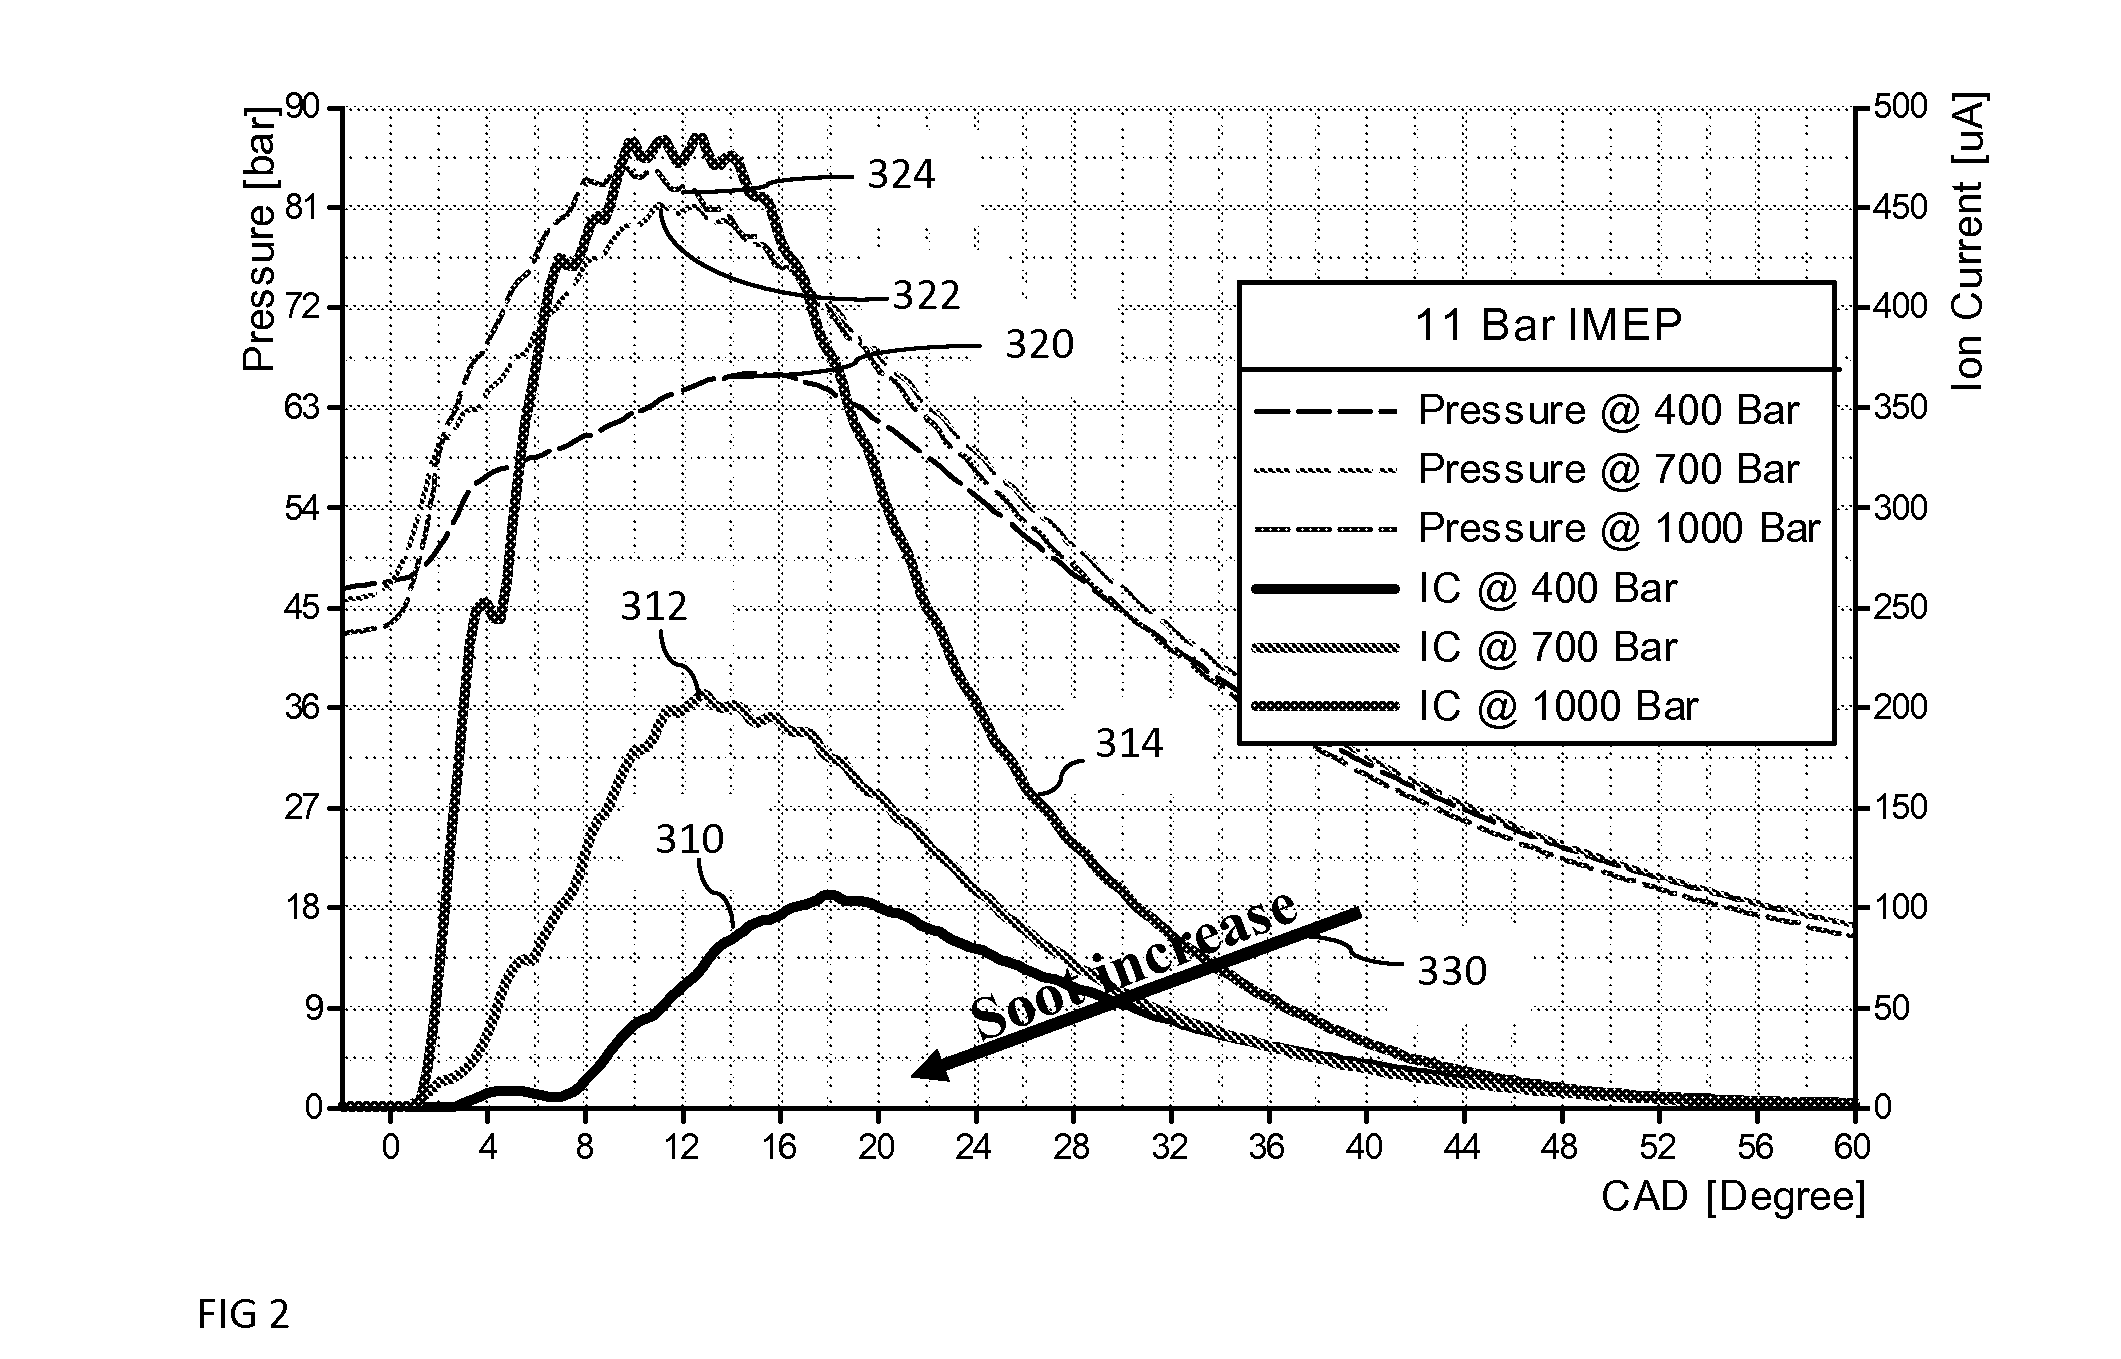 Using ion current signal for soot and in-cylinder variable measuring techniques in internal combustion engines and method for doing the same